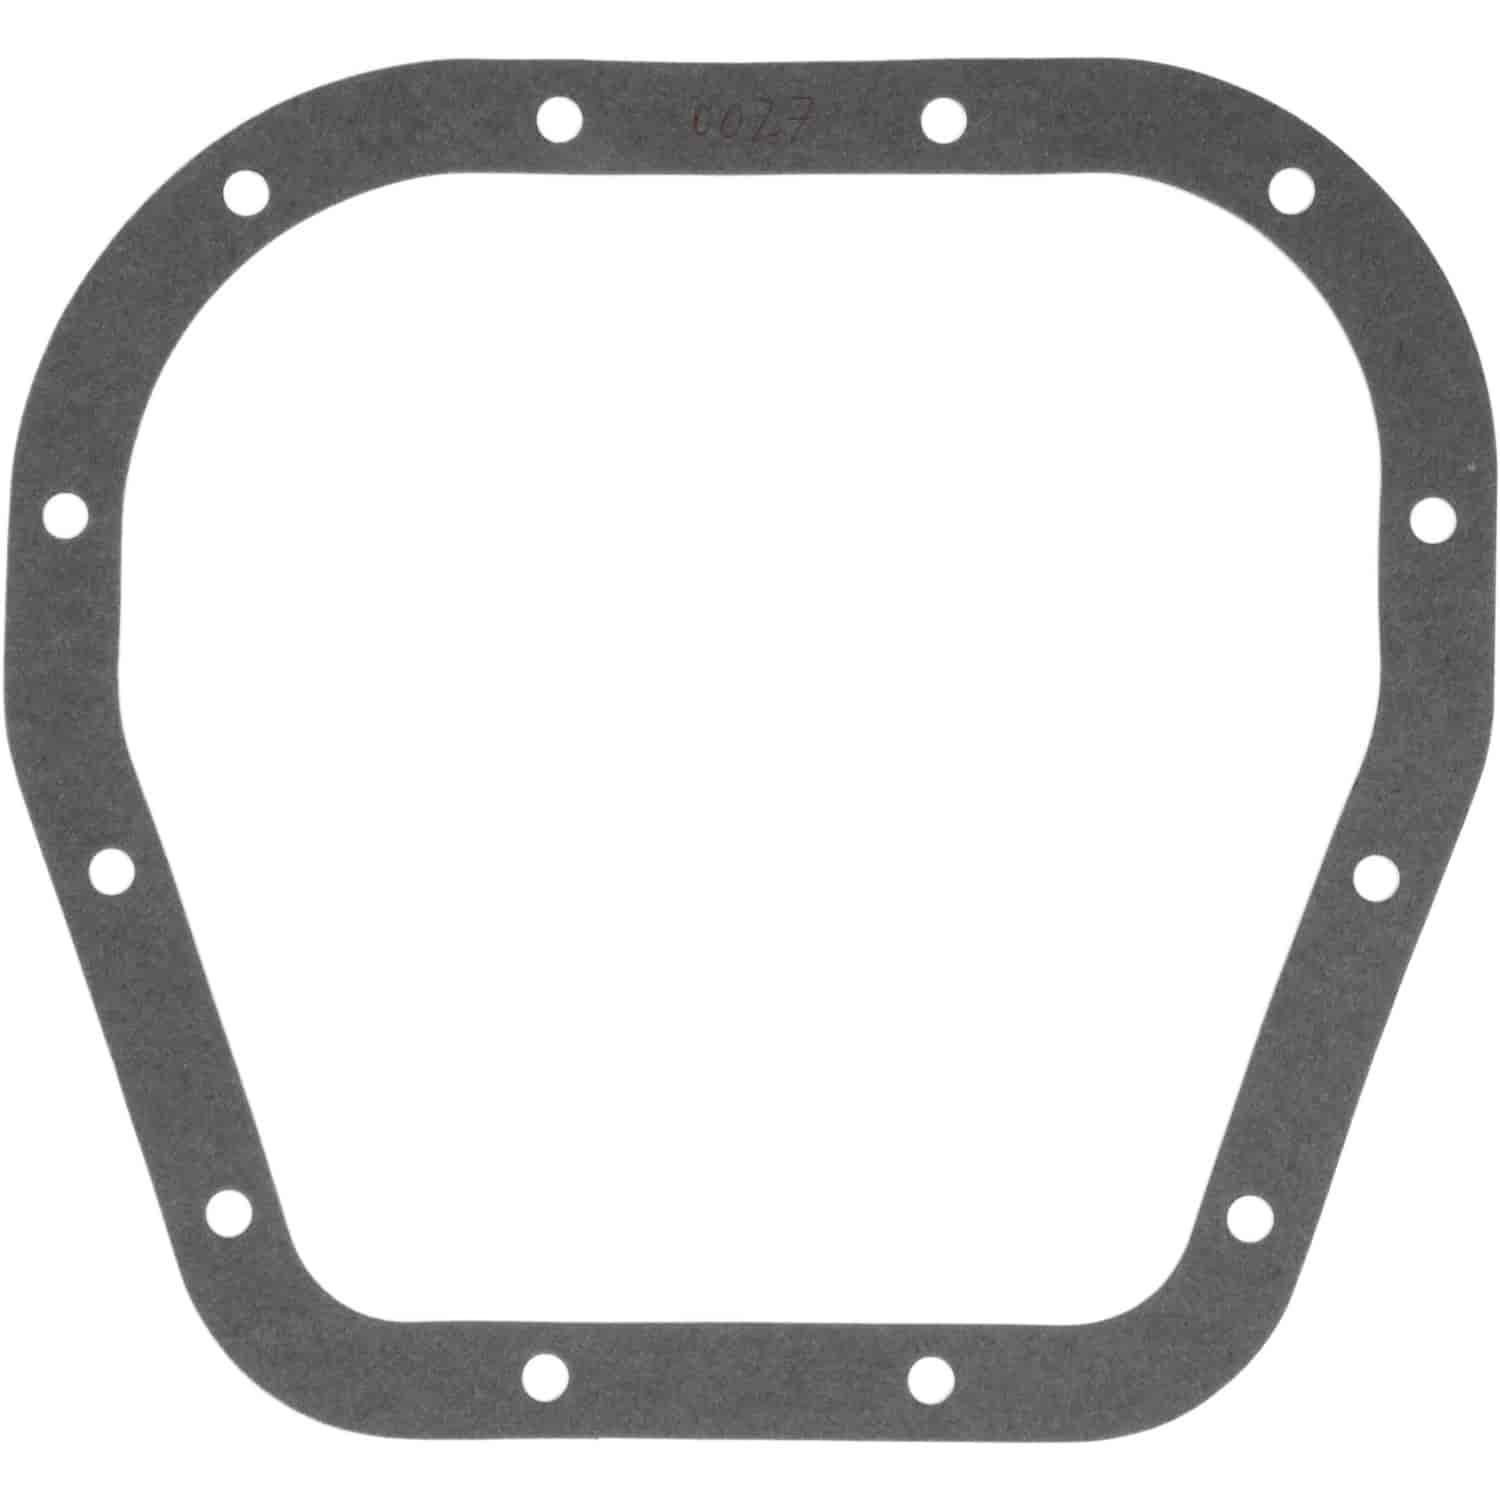 Differential Cover Gasket Ford 12-Bolt (9.5